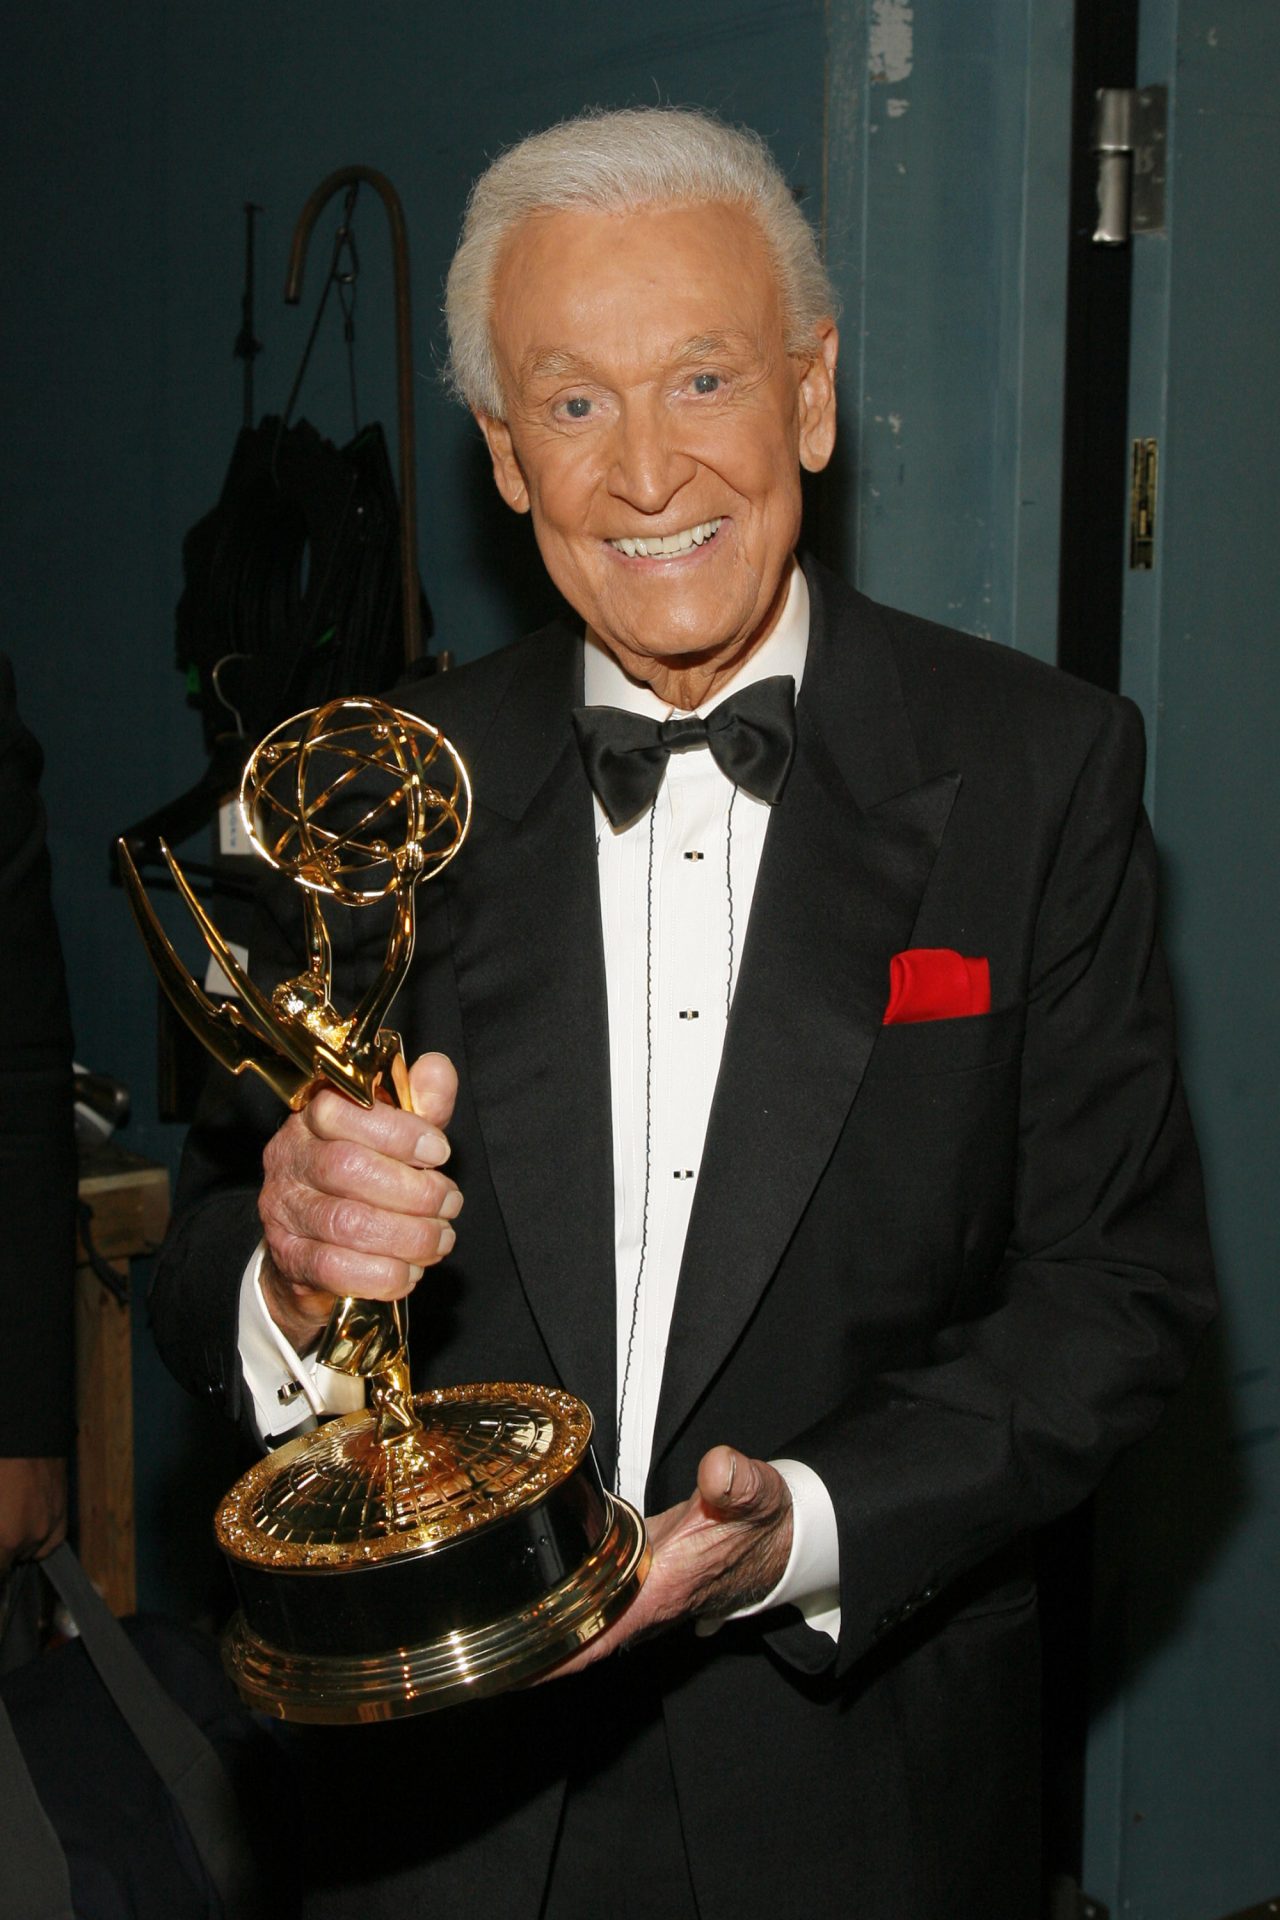 The beloved game show host won 19 Emmy awards during his career